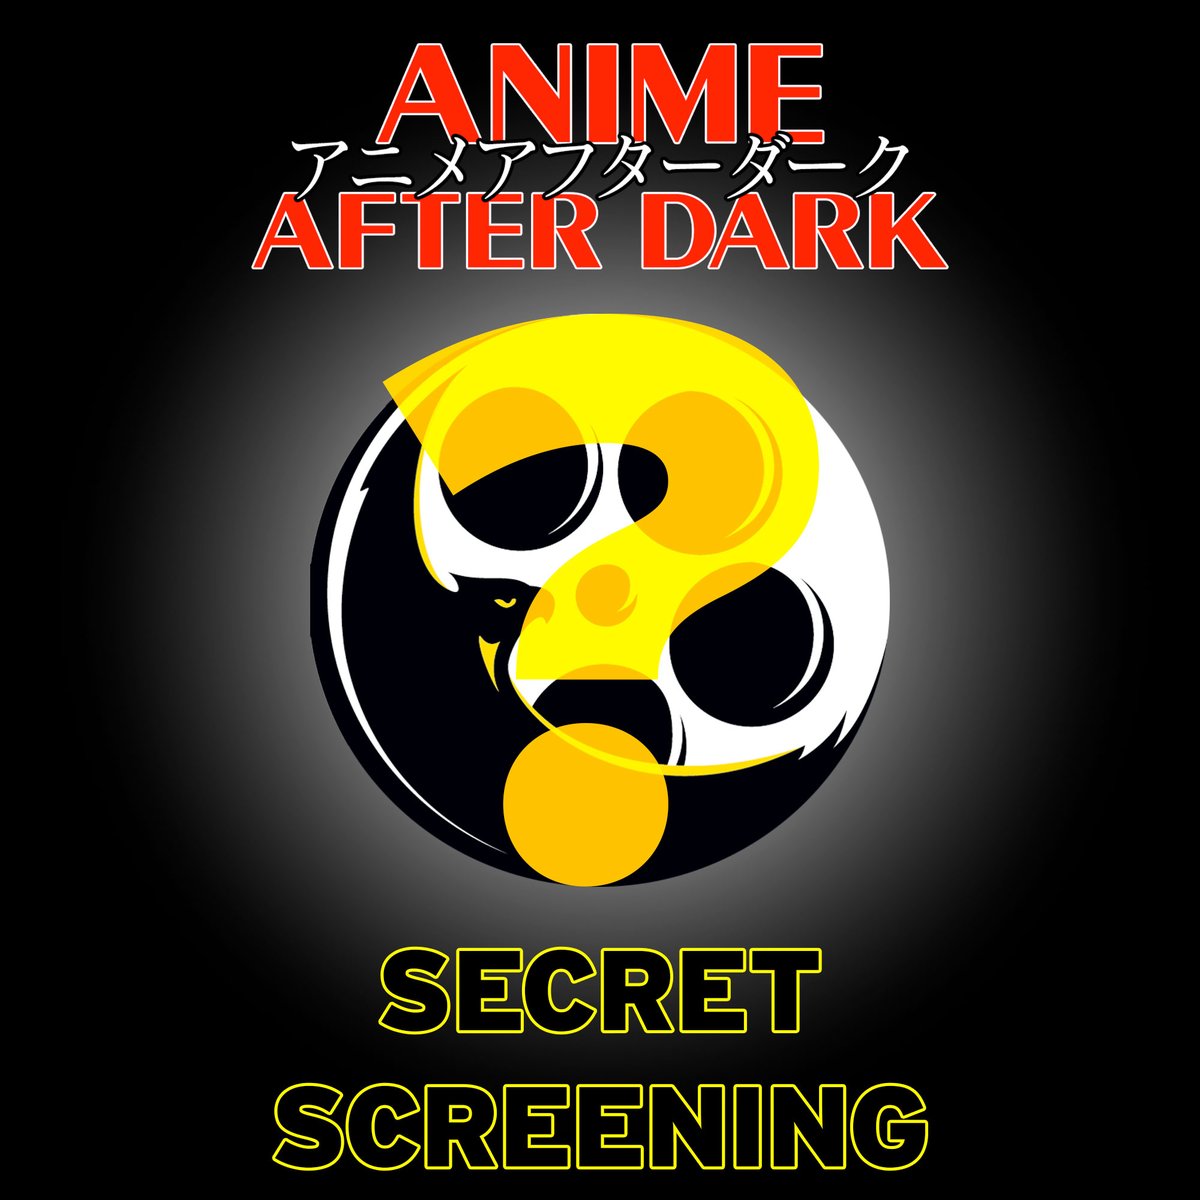 In two weeks on Monday 5/13, ANIME AFTER DARK goes cryptic with a rarely screened anime classic, a blighted dream of a film, lit large at Nitehawk Williamsburg for one nite only. We’re mum on the title, but we do have clues (and tickets) at the link: bit.ly/4bdIpgb